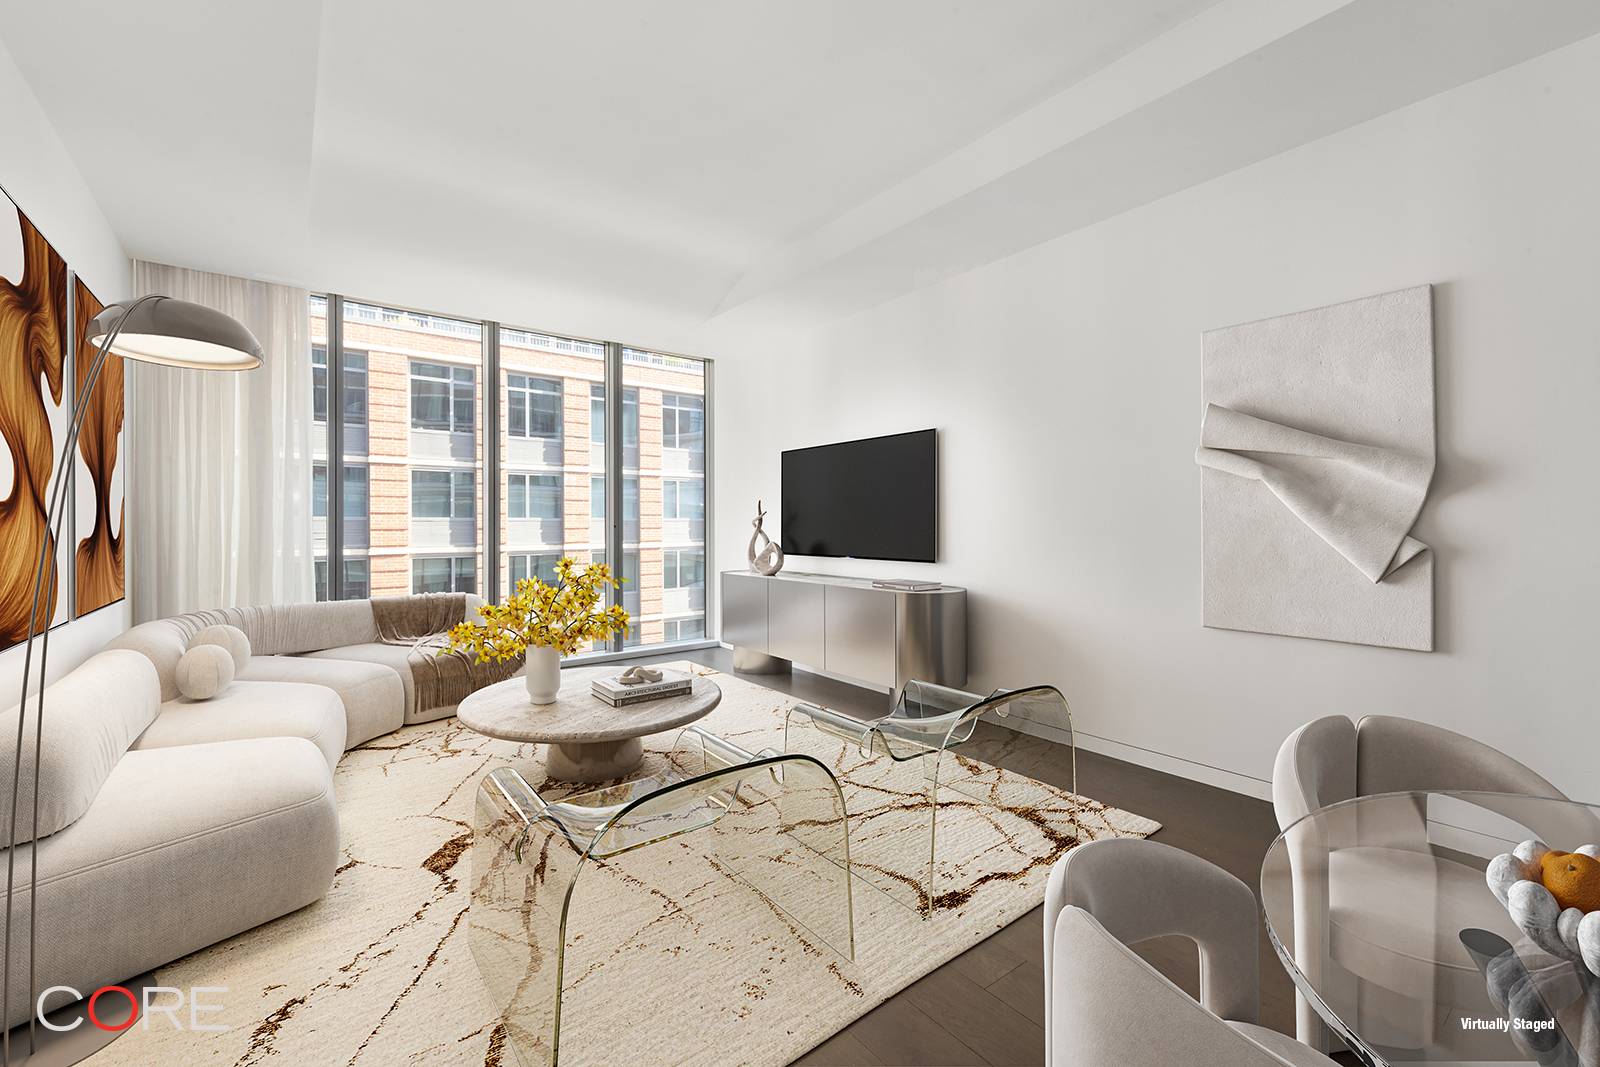 Presenting the opportunity to live in Zaha Hadid s 520 West 28th, is this 1, 717 SF, two bedroom, two and a half bathroom home in West Chelsea.